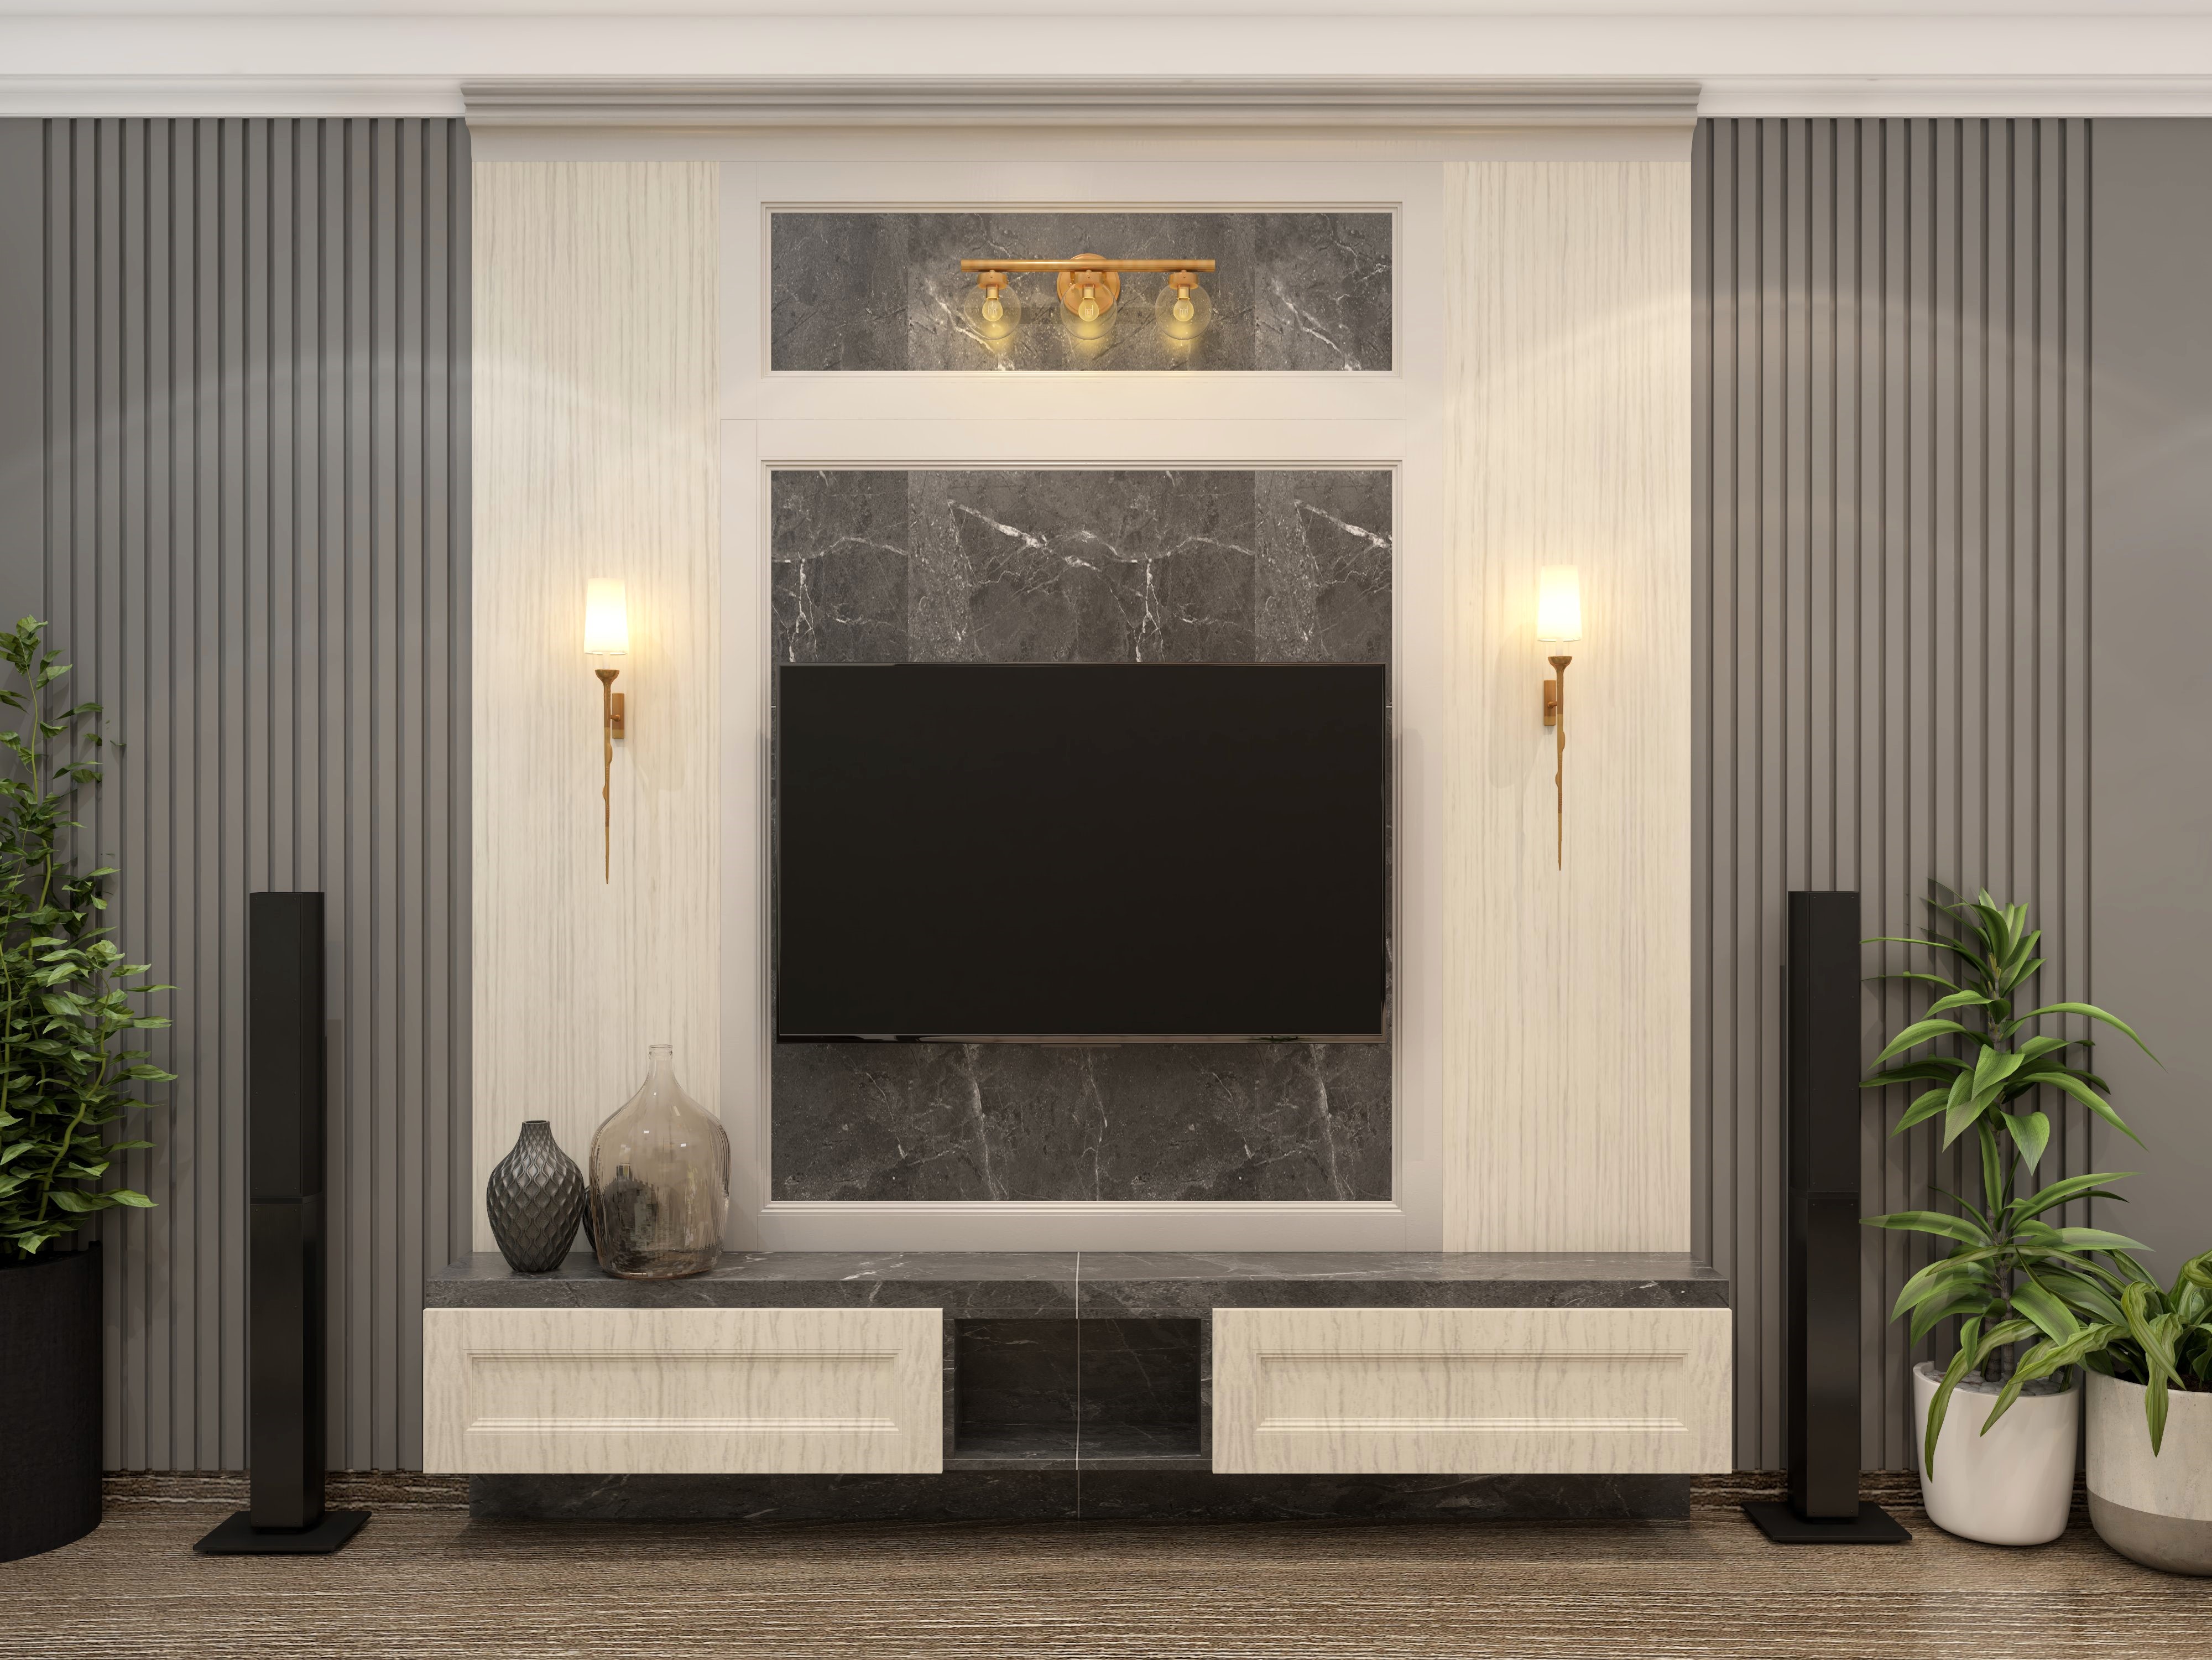 Modern TV unit with marble back panel and wall lights - Beautiful Homes